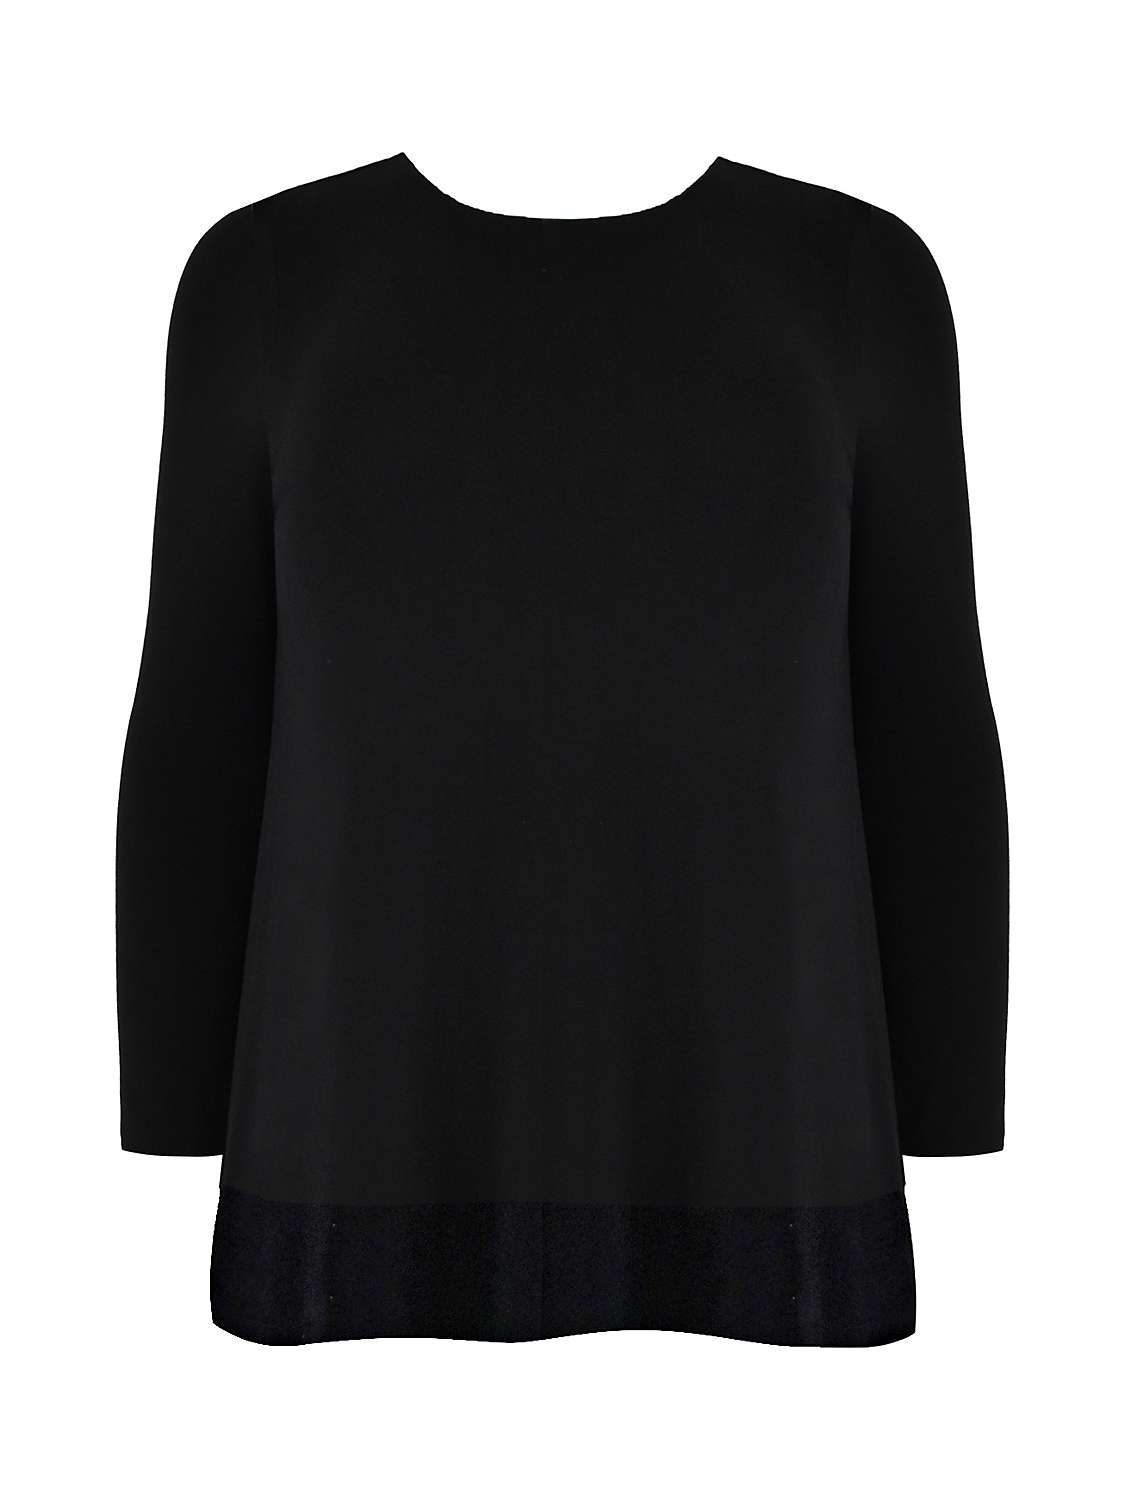 Buy Live Unlimited Curve Jersey Overlay Tunic, Black Online at johnlewis.com